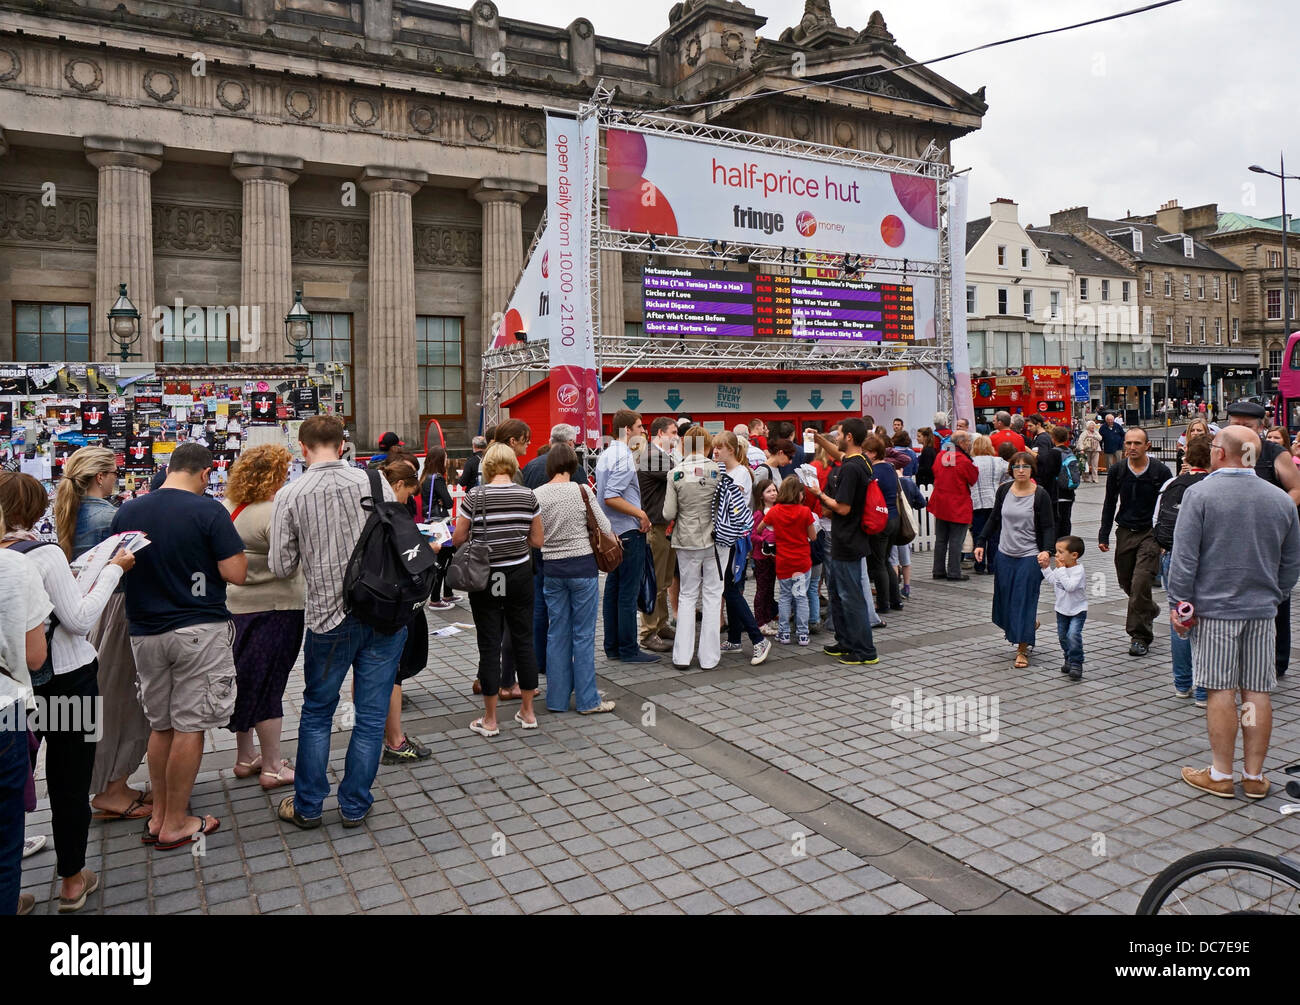 Eager Edinburgh Festival Fringe participants queuing at the Half-price Hut on the Mound by Princes Street in Edinburgh Stock Photo